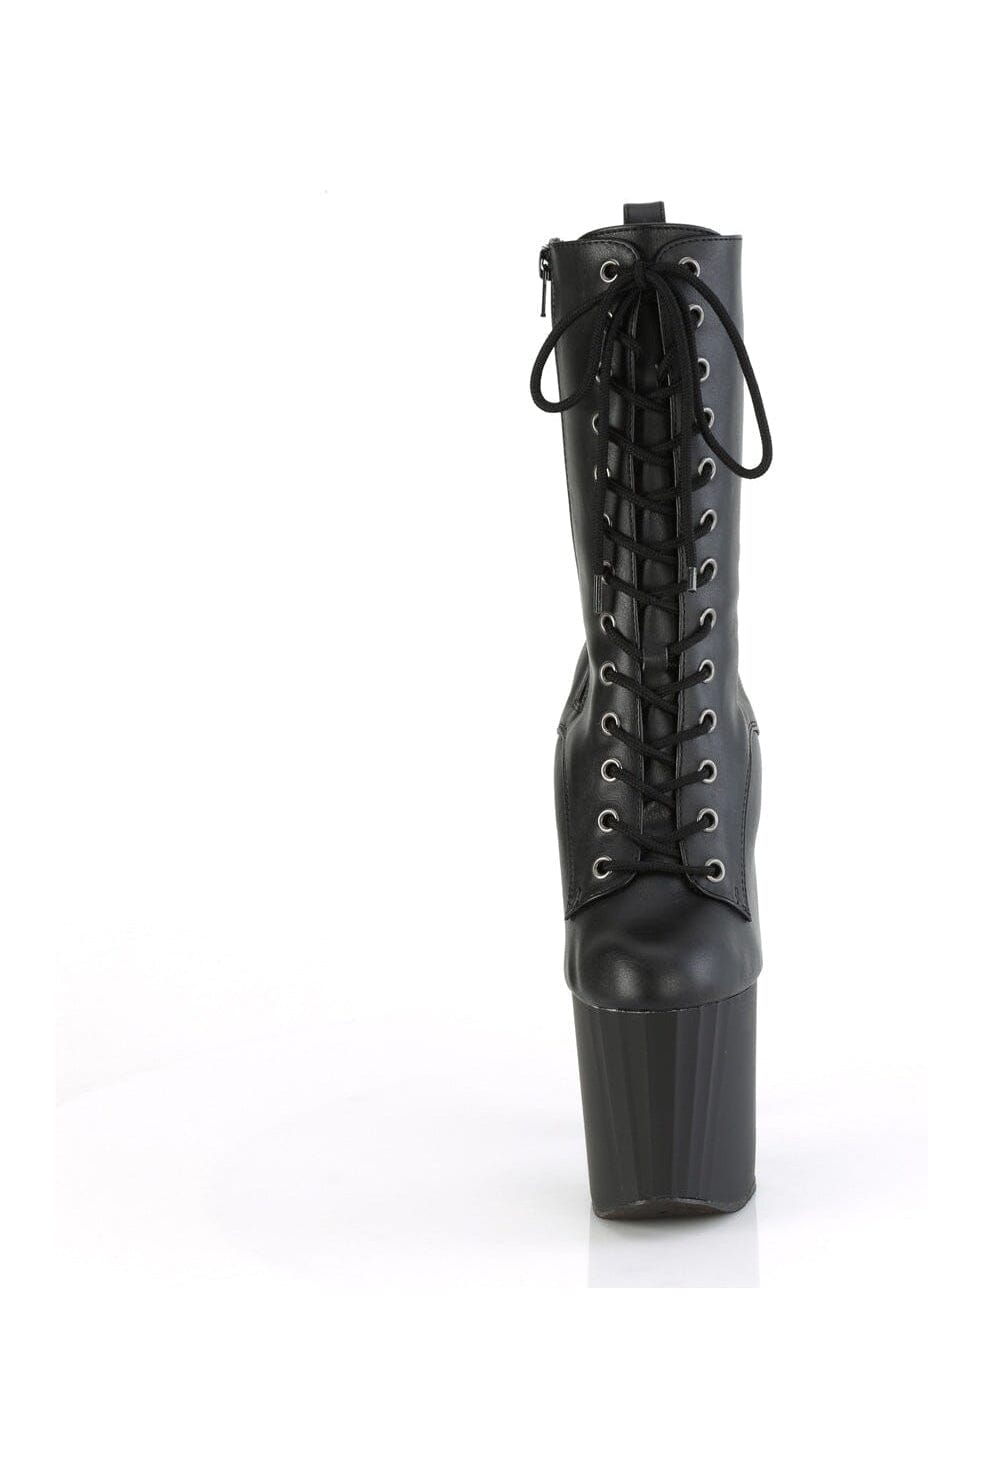 ENCHANT-1040 Black Faux Leather Knee Boot-Knee Boots-Pleaser-SEXYSHOES.COM